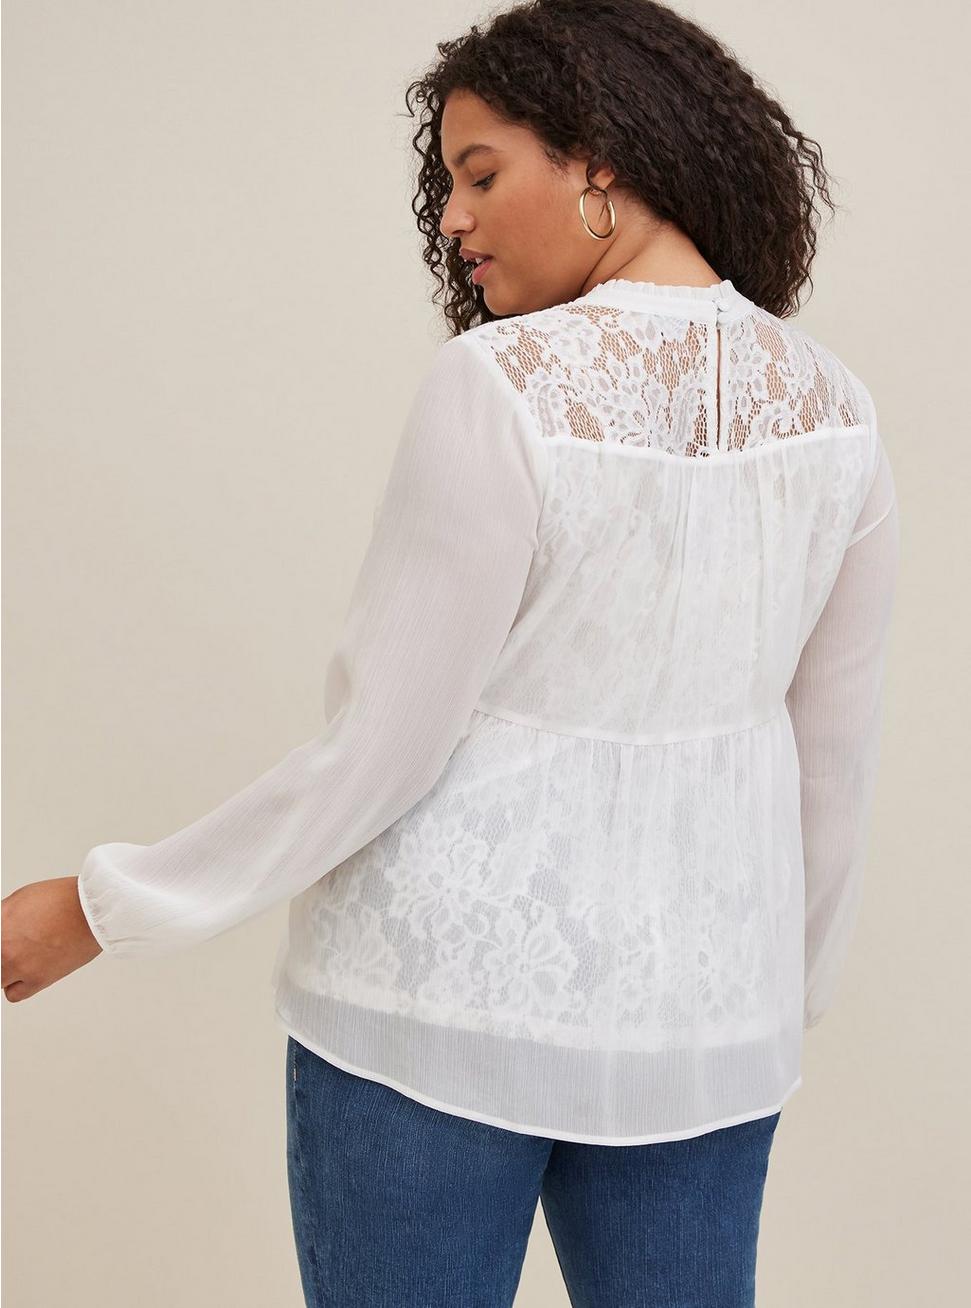 Plus Size Lace With Chiffon Overlay Blouse, CLOUD DANCER, alternate